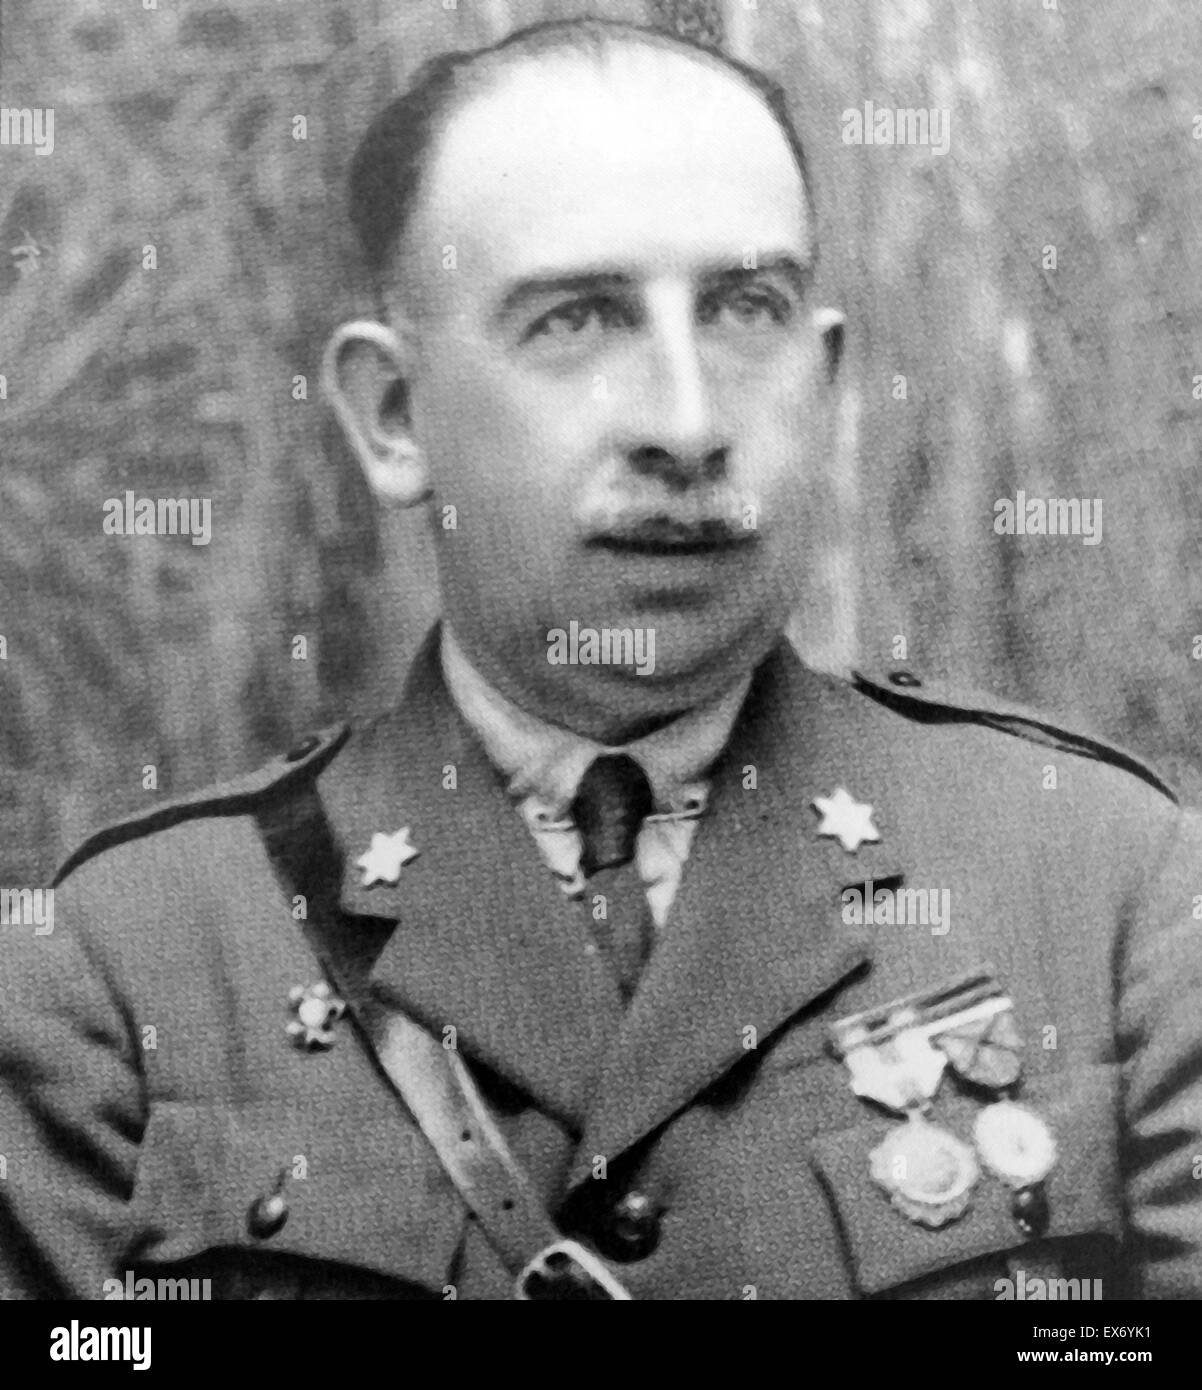 Luis Orgaz Yoldi (28 May 1881, Vitoria – 31 January 1946, Madrid) was a Spanish general who was a leading figure on the Nationalist side in the Spanish Civil War. He later went on to become a critic of the regime of Francisco Franco Stock Photo